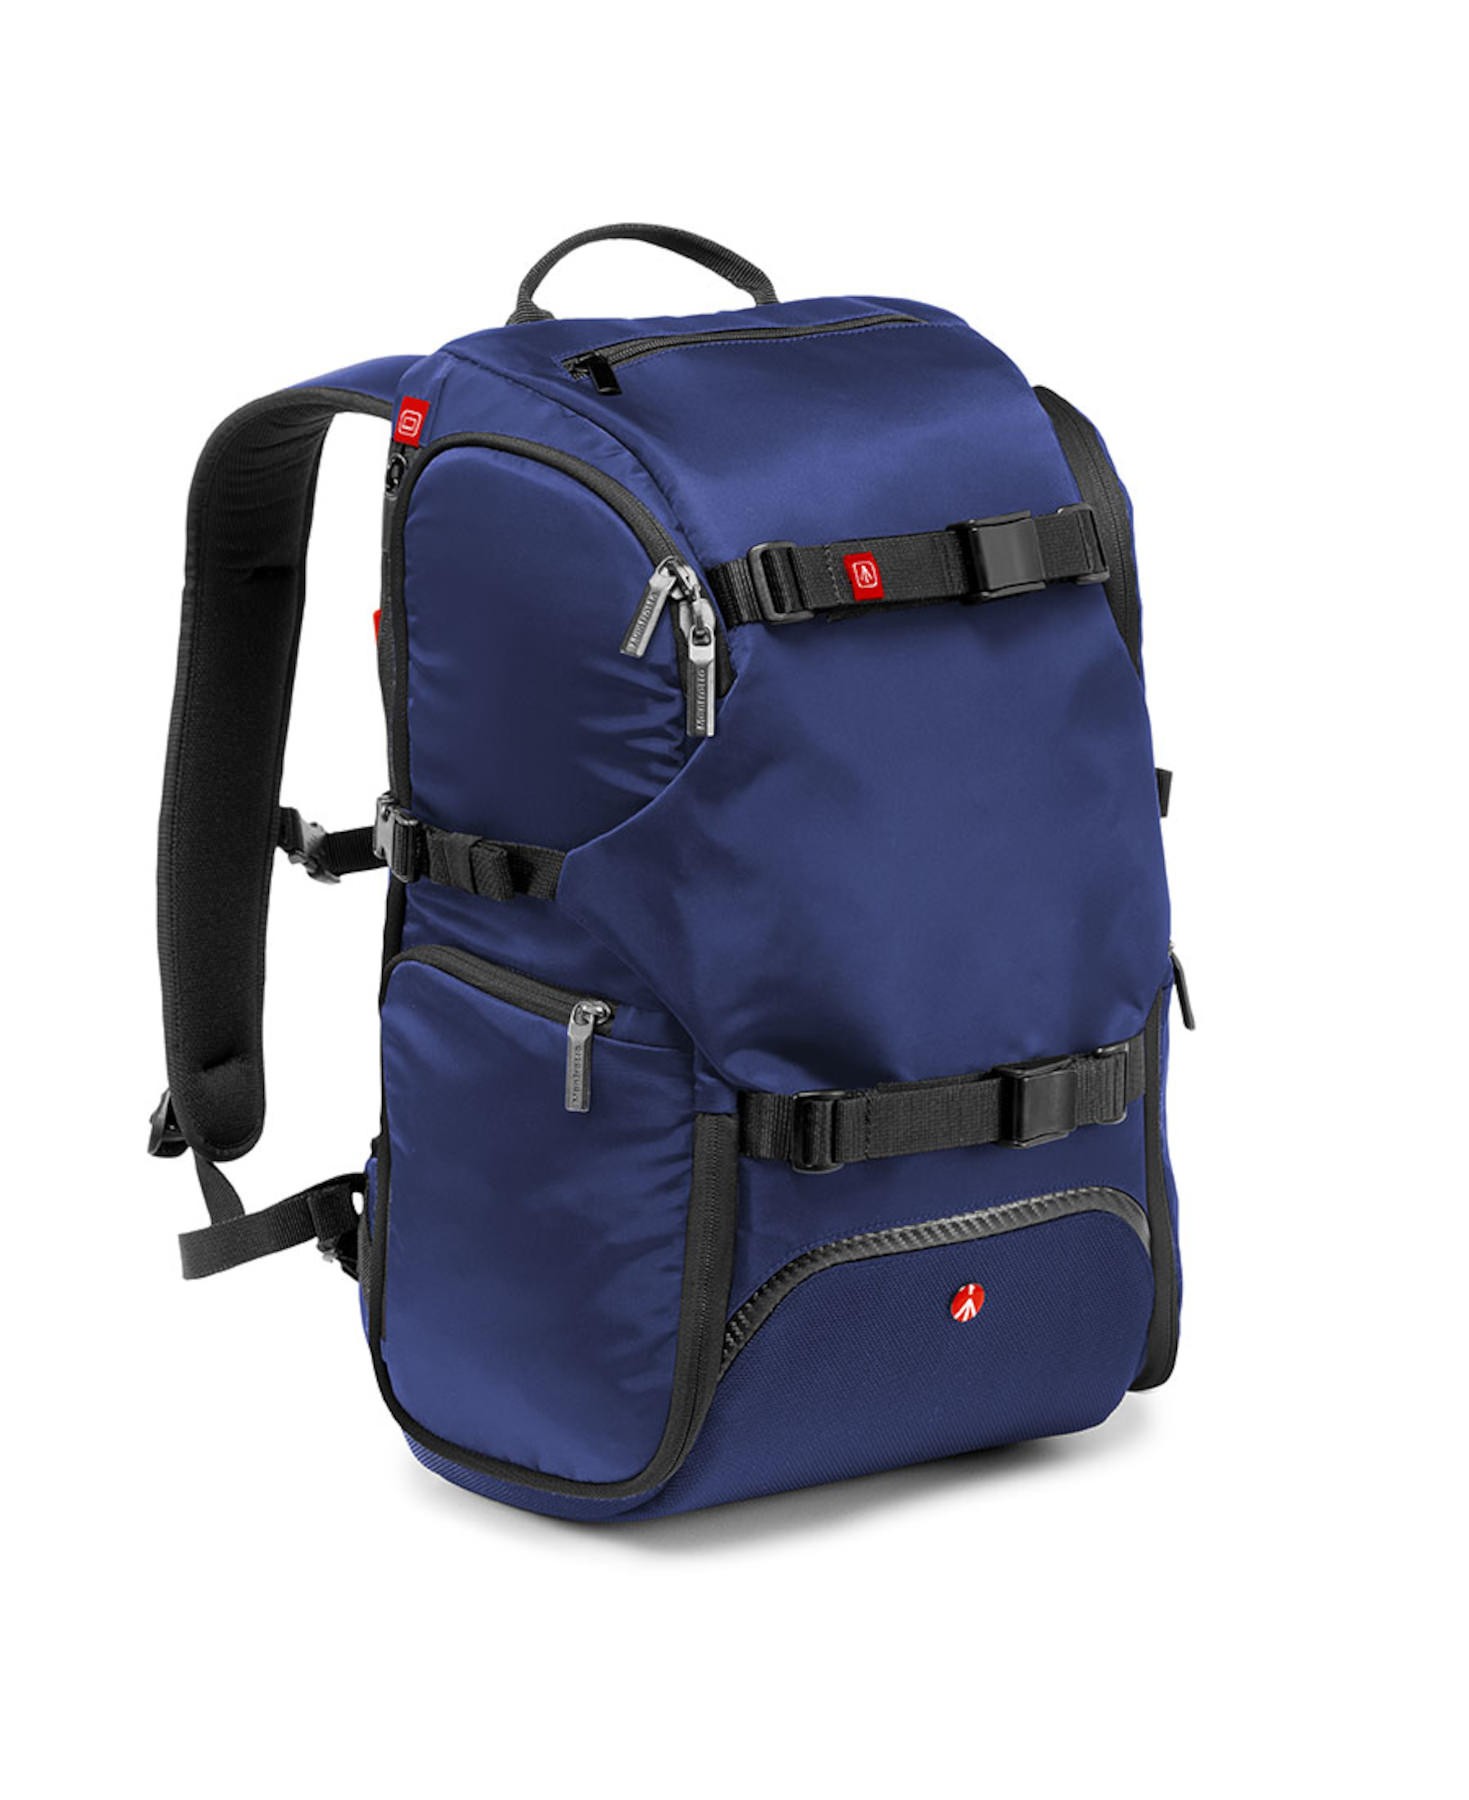 Advanced Camera and Laptop Backpack, travel blue